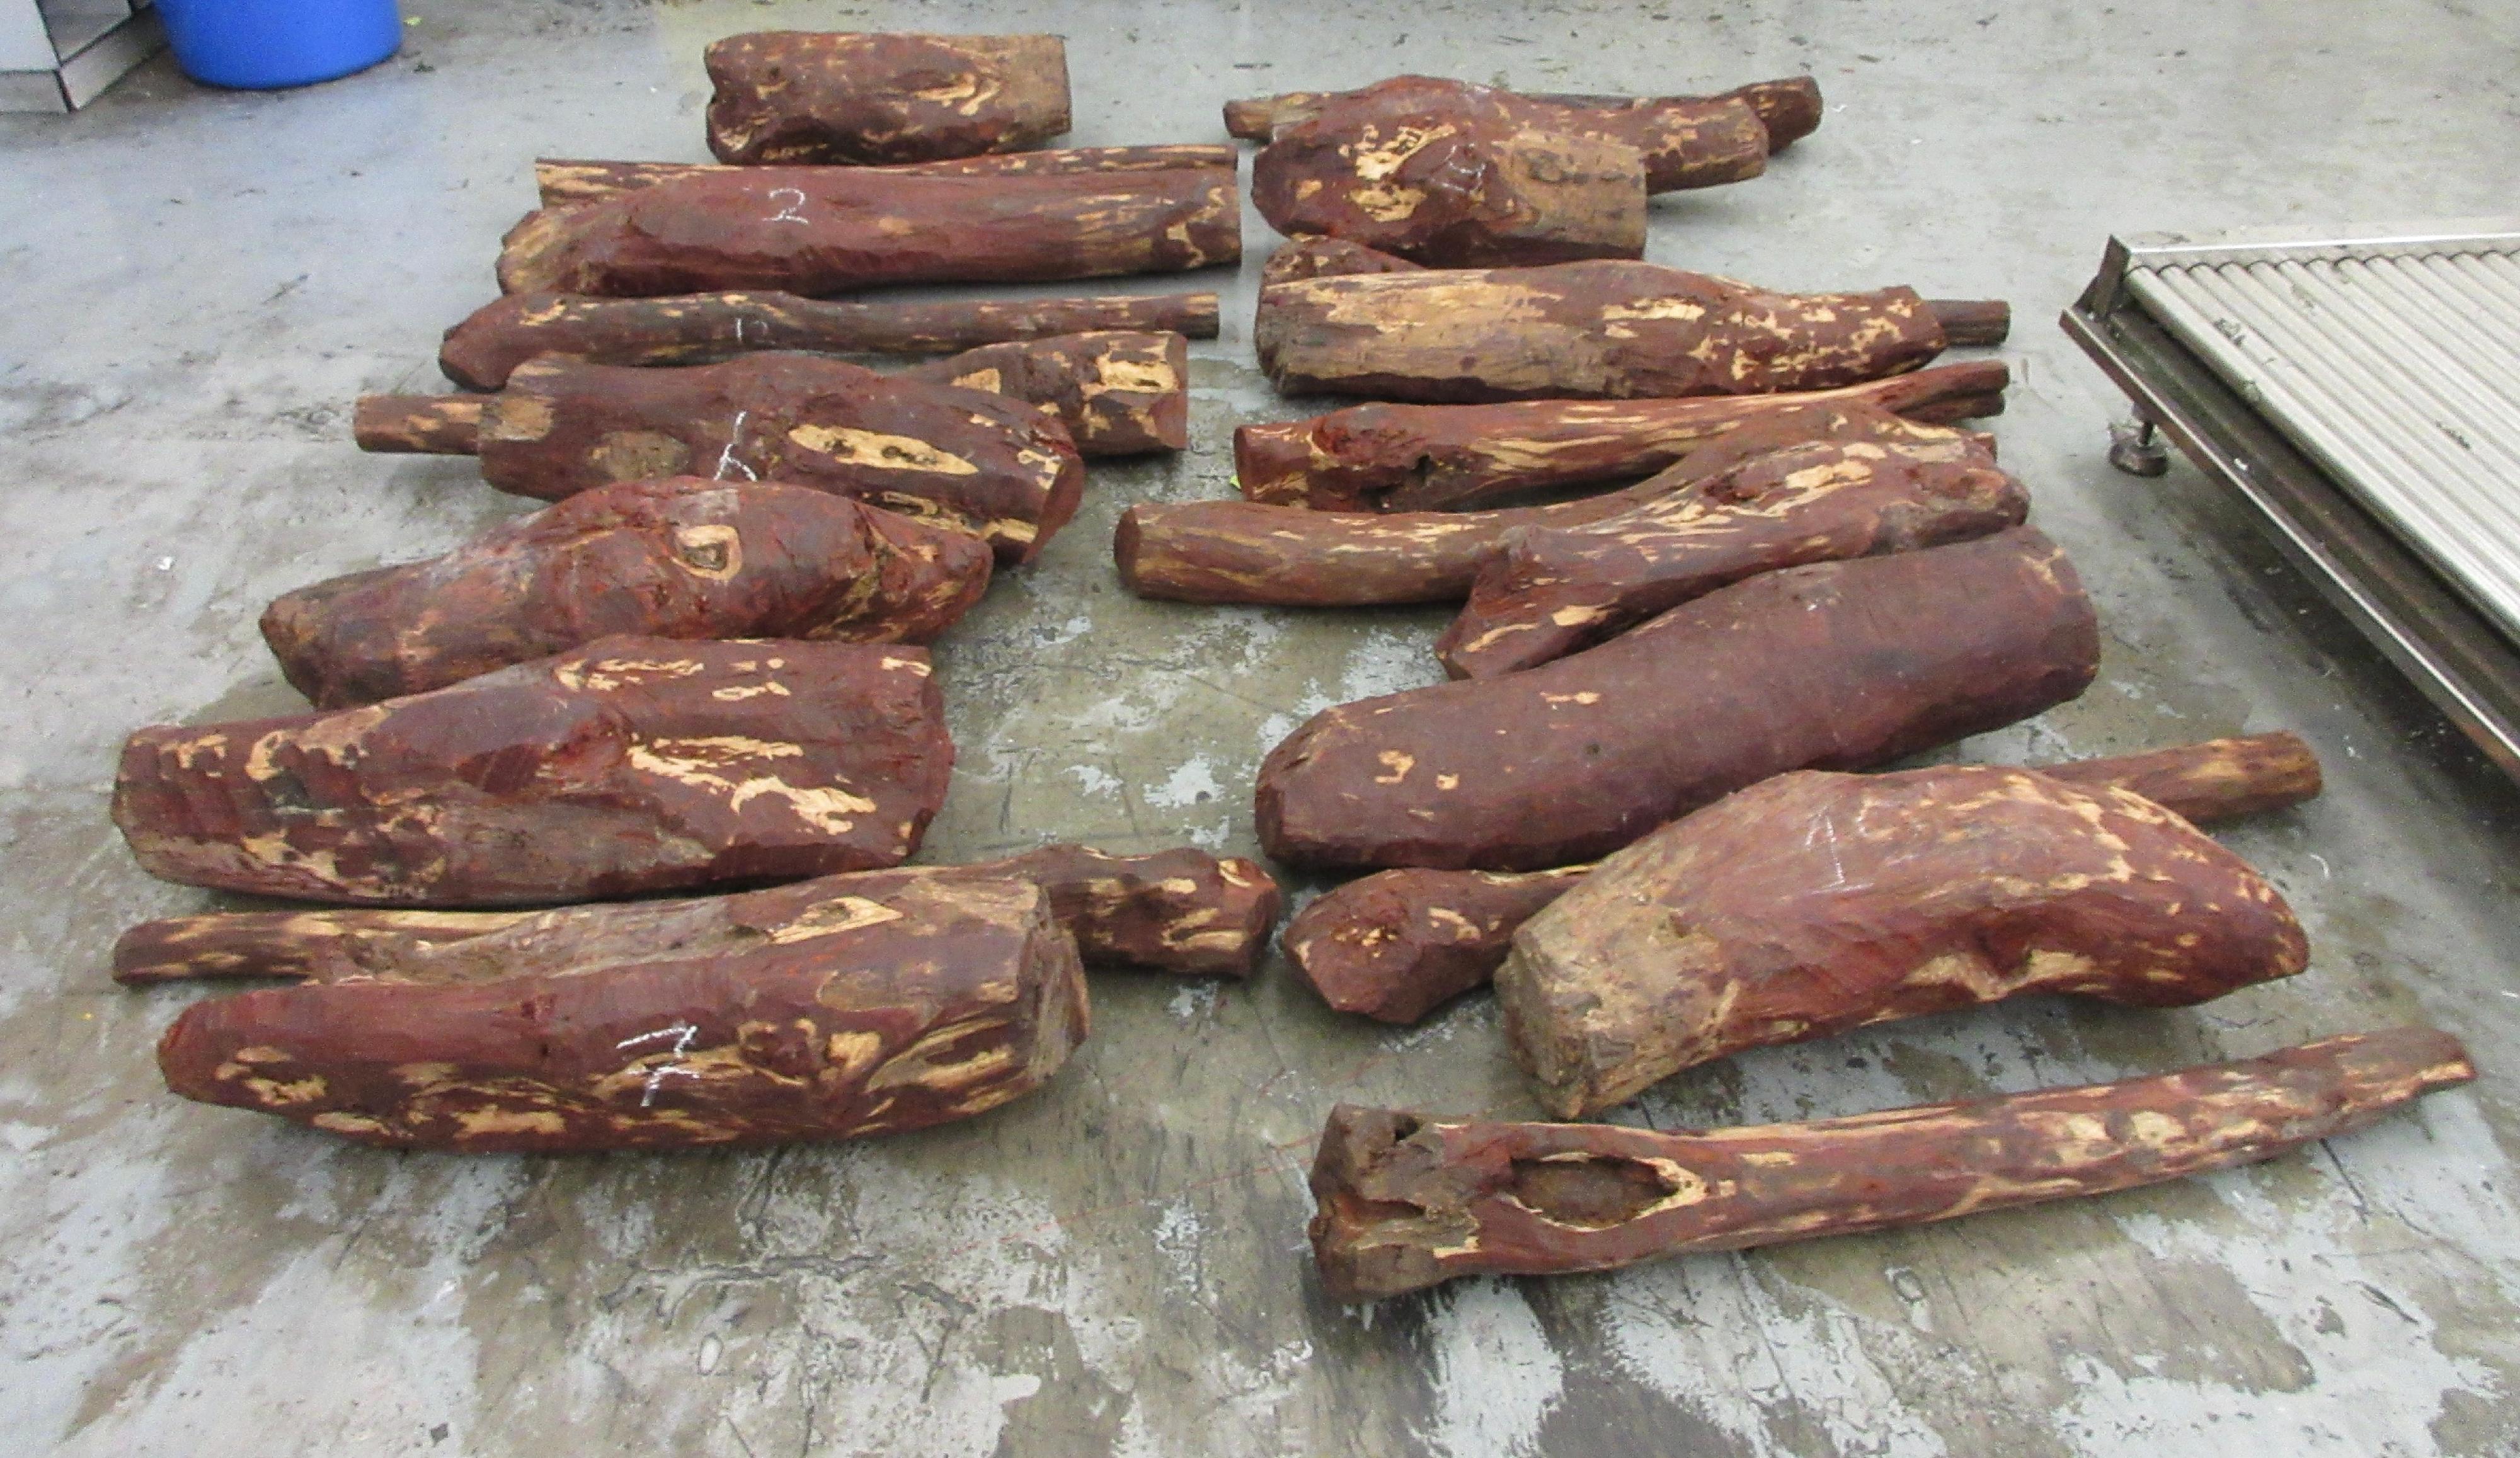 Hong Kong Customs yesterday (March 16) seized a total of about 5 170 kilograms of suspected scheduled red sandalwood, with an estimated market value of about $7.15 million, at the Kwai Chung Customhouse Cargo Examination Compound and Hong Kong International Airport (HKIA). Photo shows the suspected scheduled red sandalwood seized by Customs officers at HKIA.